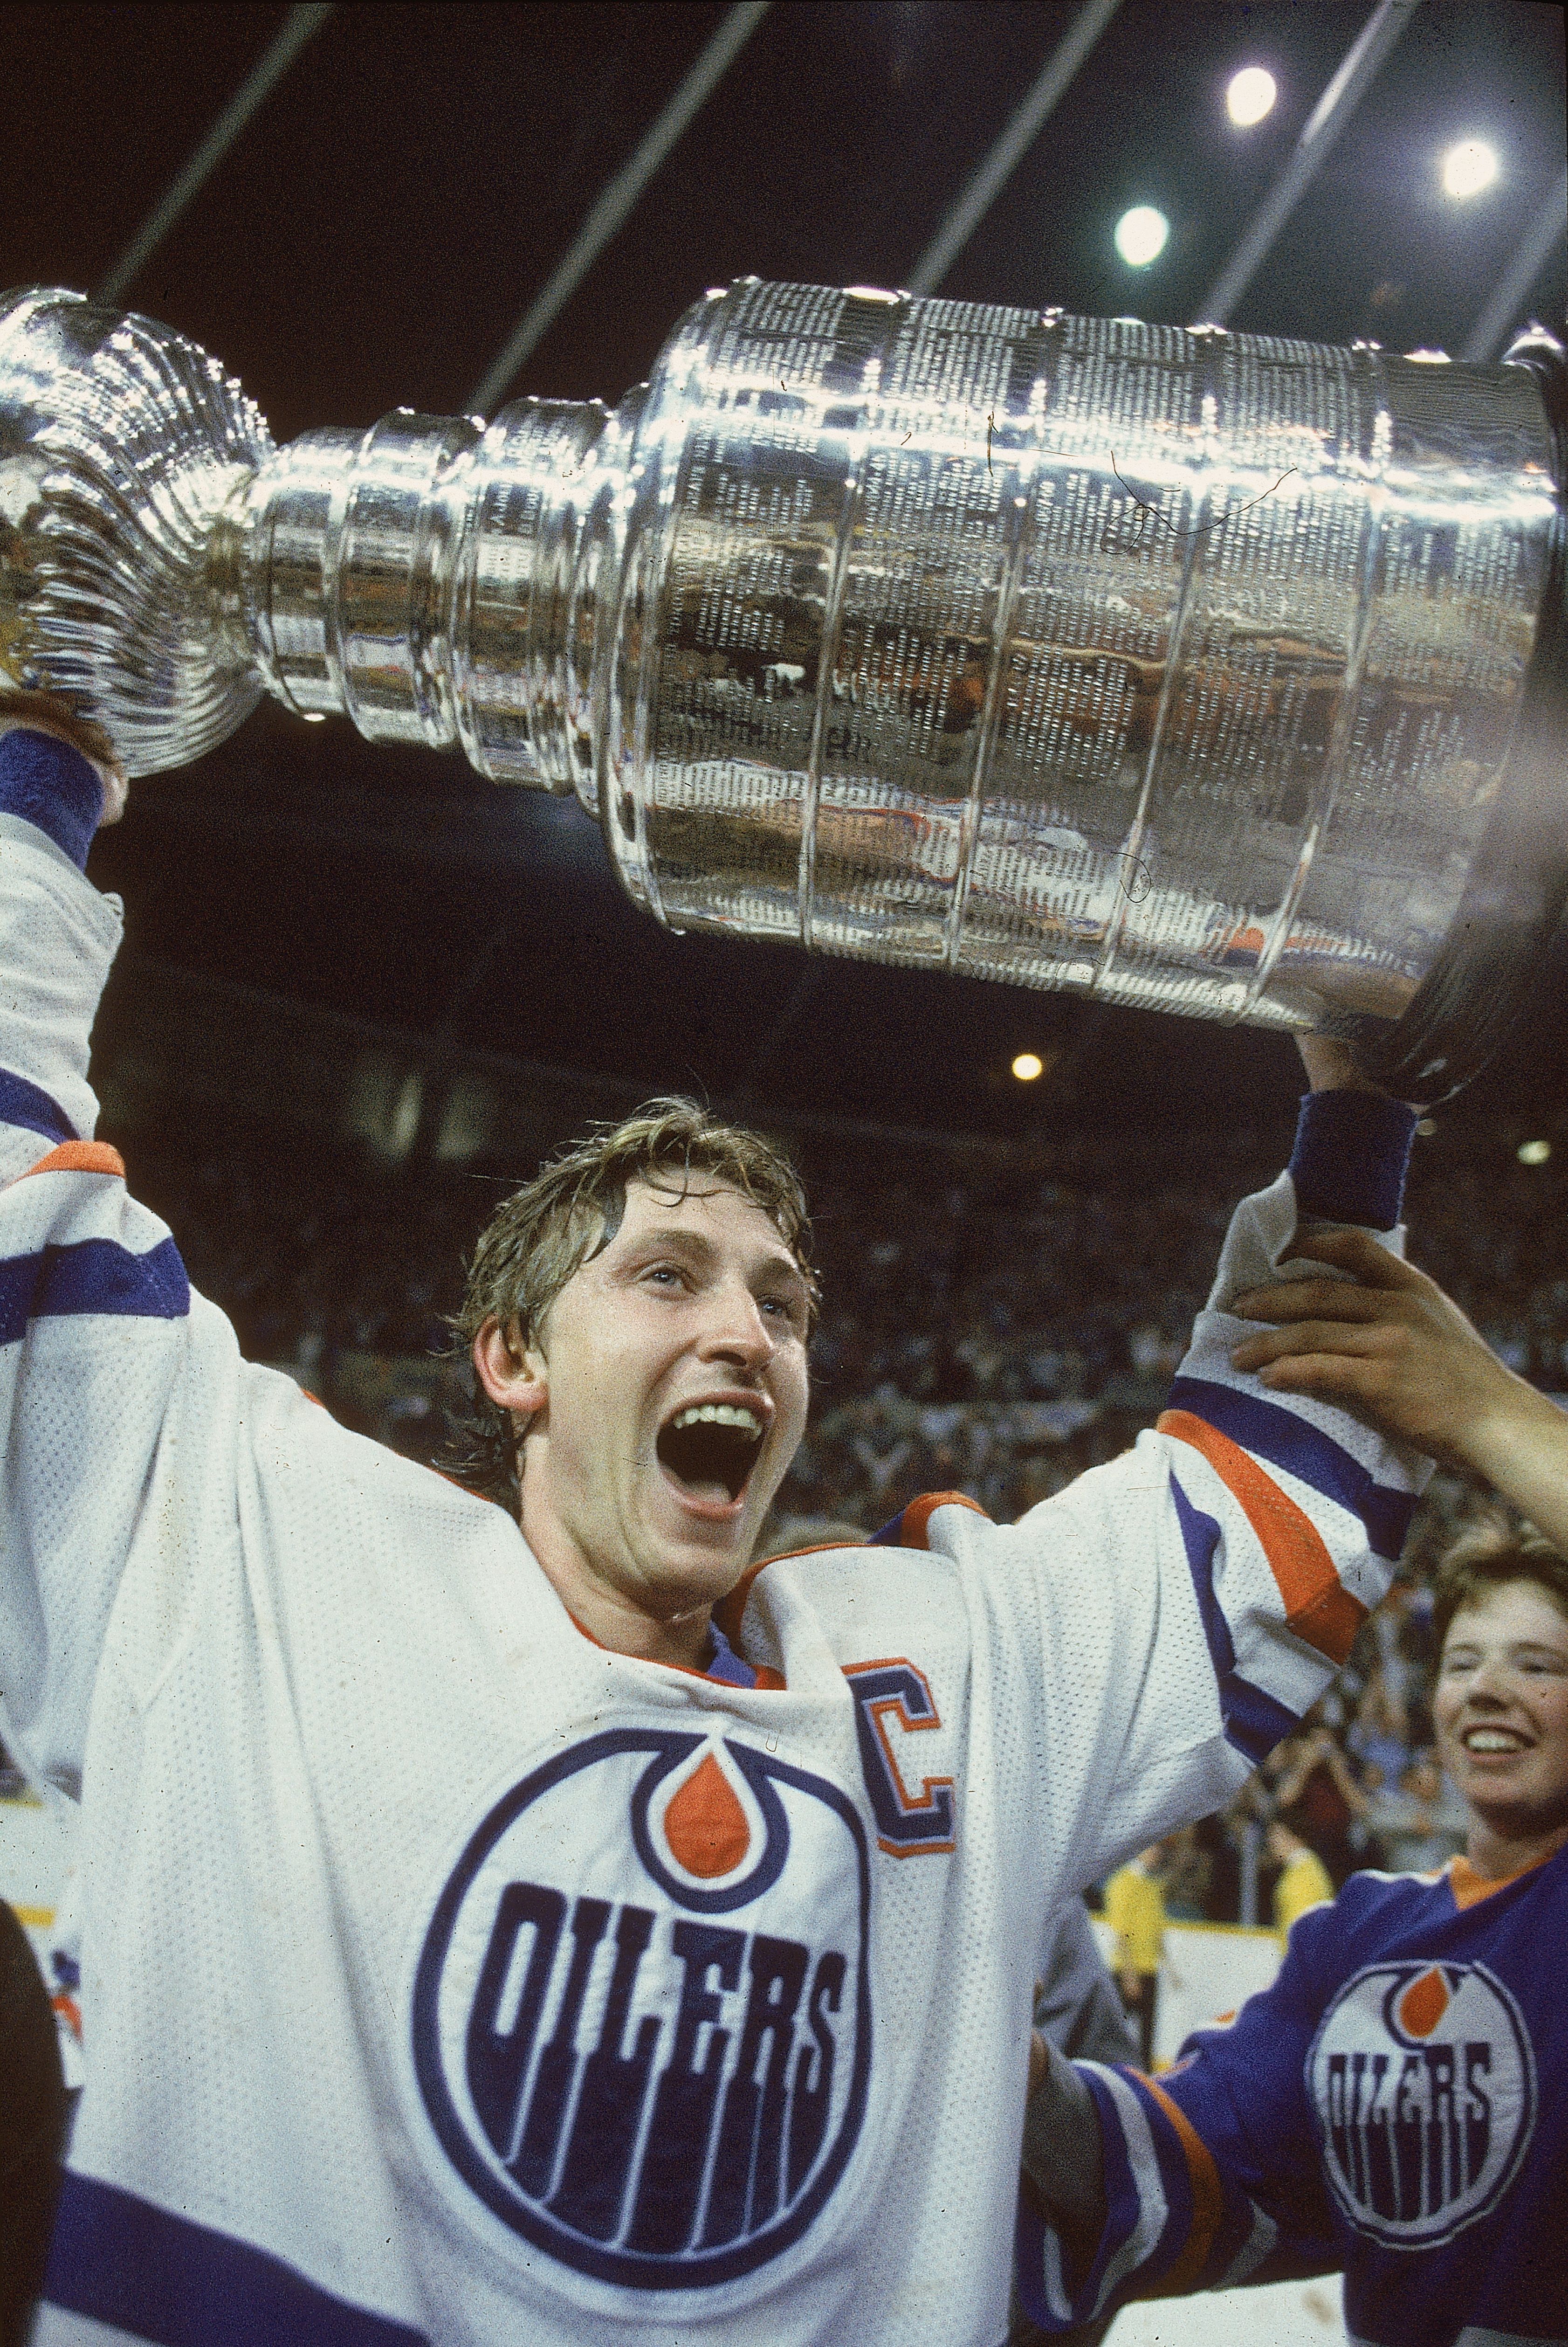 Wayne Gretzky holding the Stanley Cup